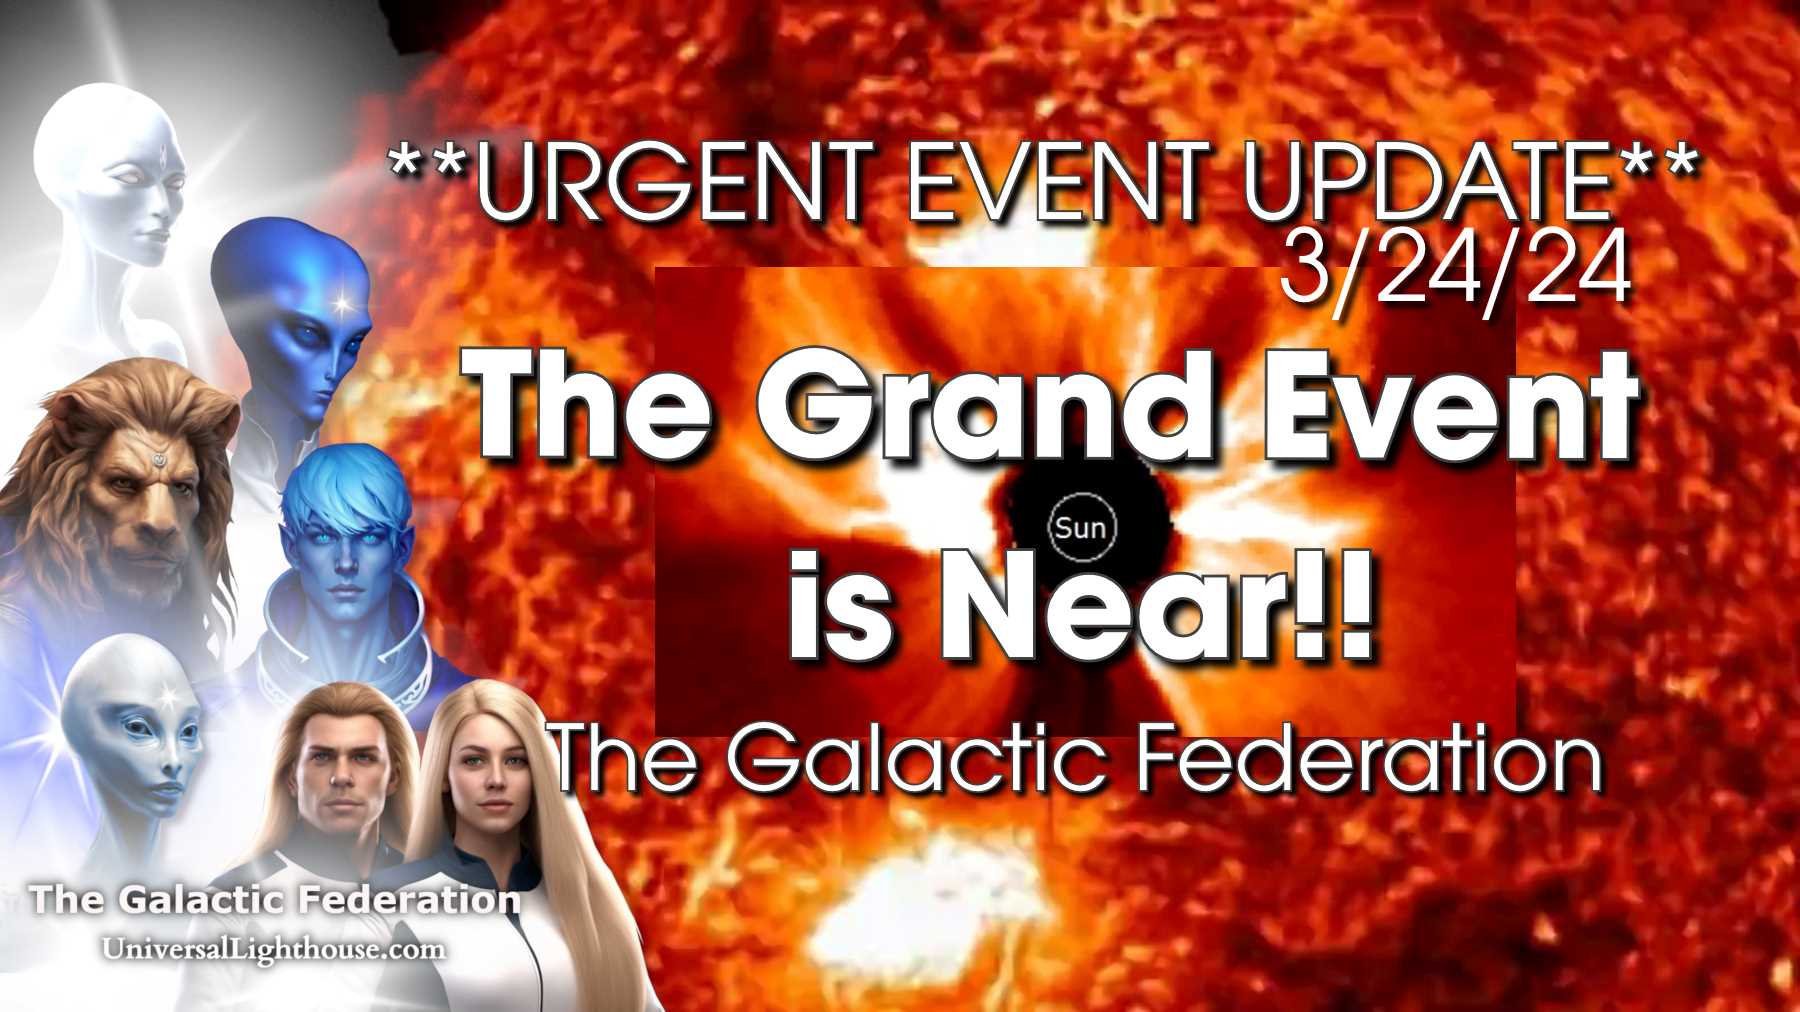 The Grand Event is Near